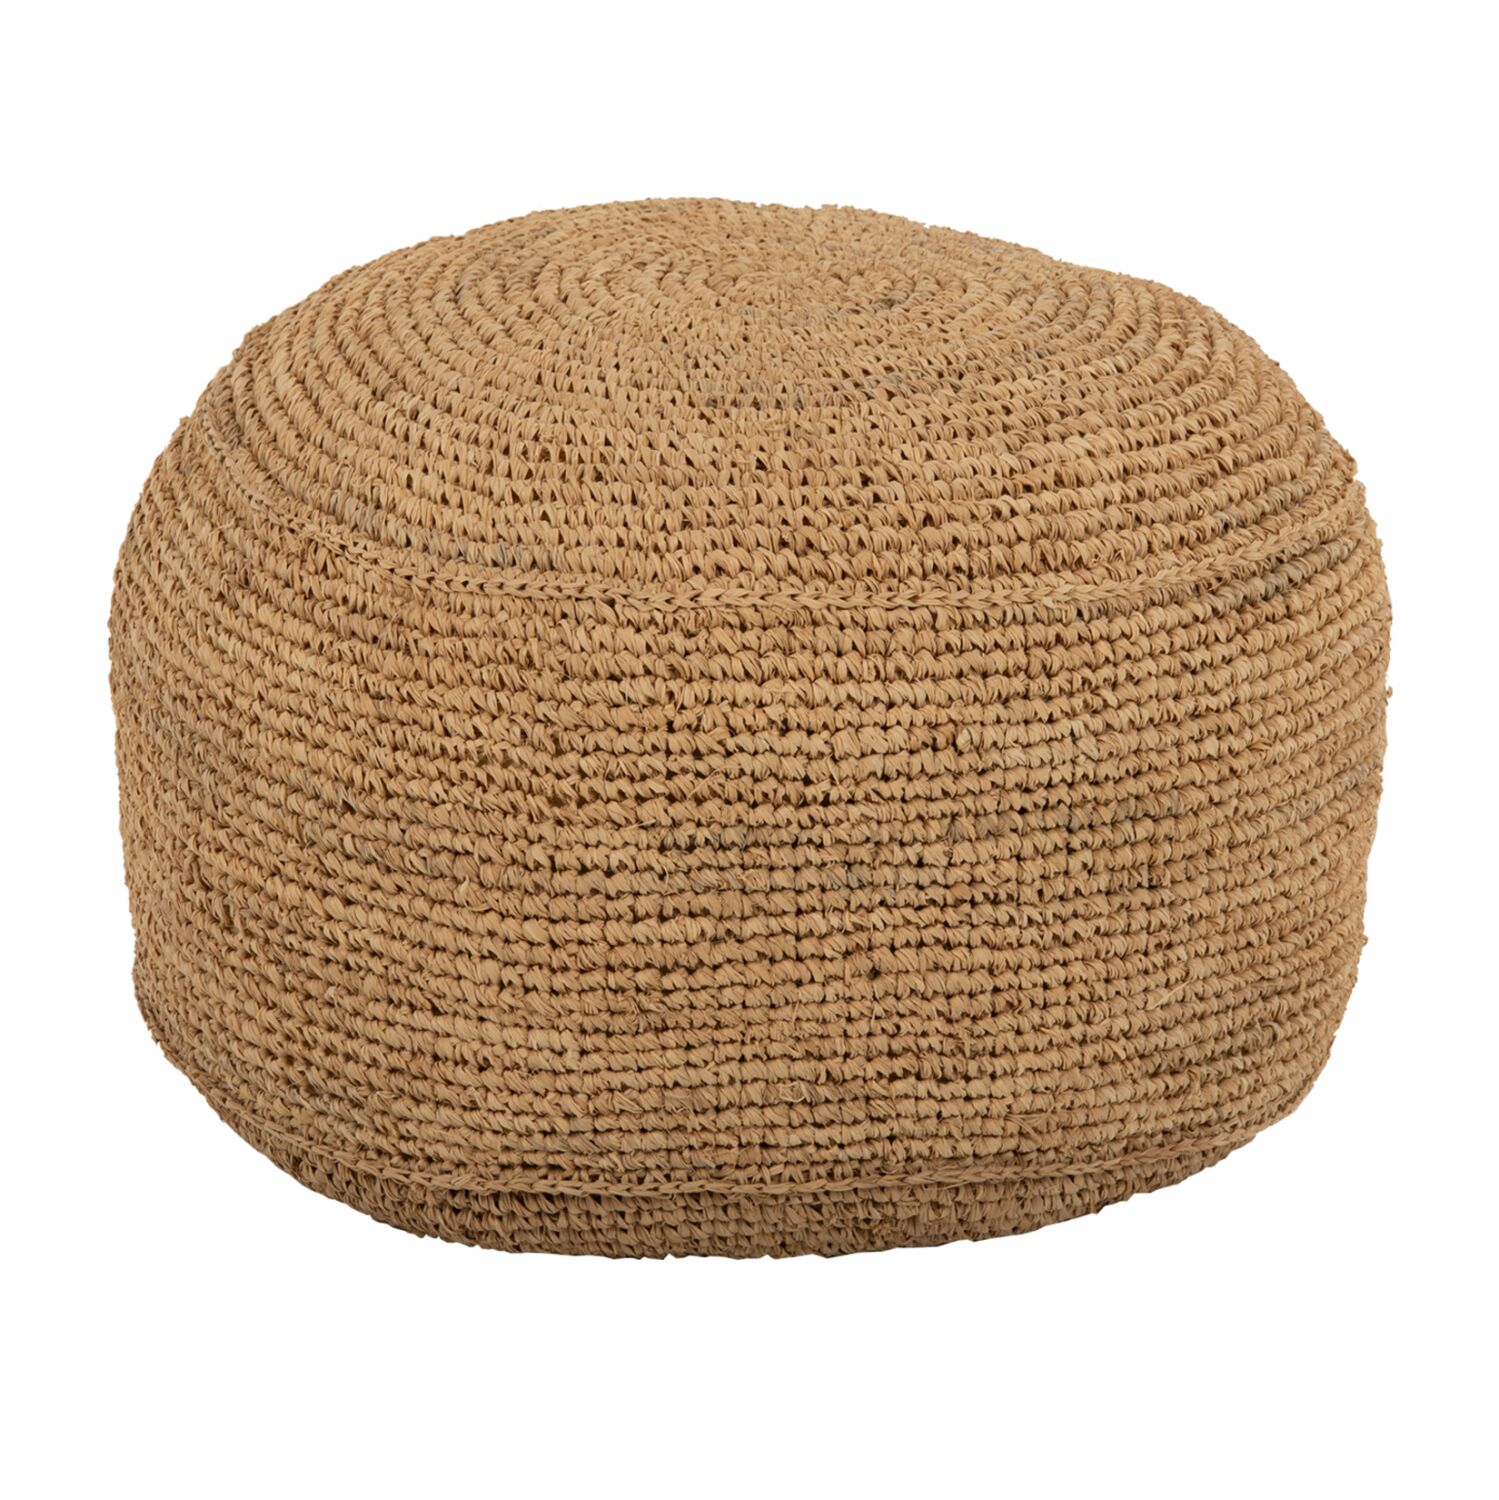 STOOL-POUF AONI HM7828 MADE OF DRIED PALM FIBERS IN NATURAL COLOR Φ48x37Hcm.